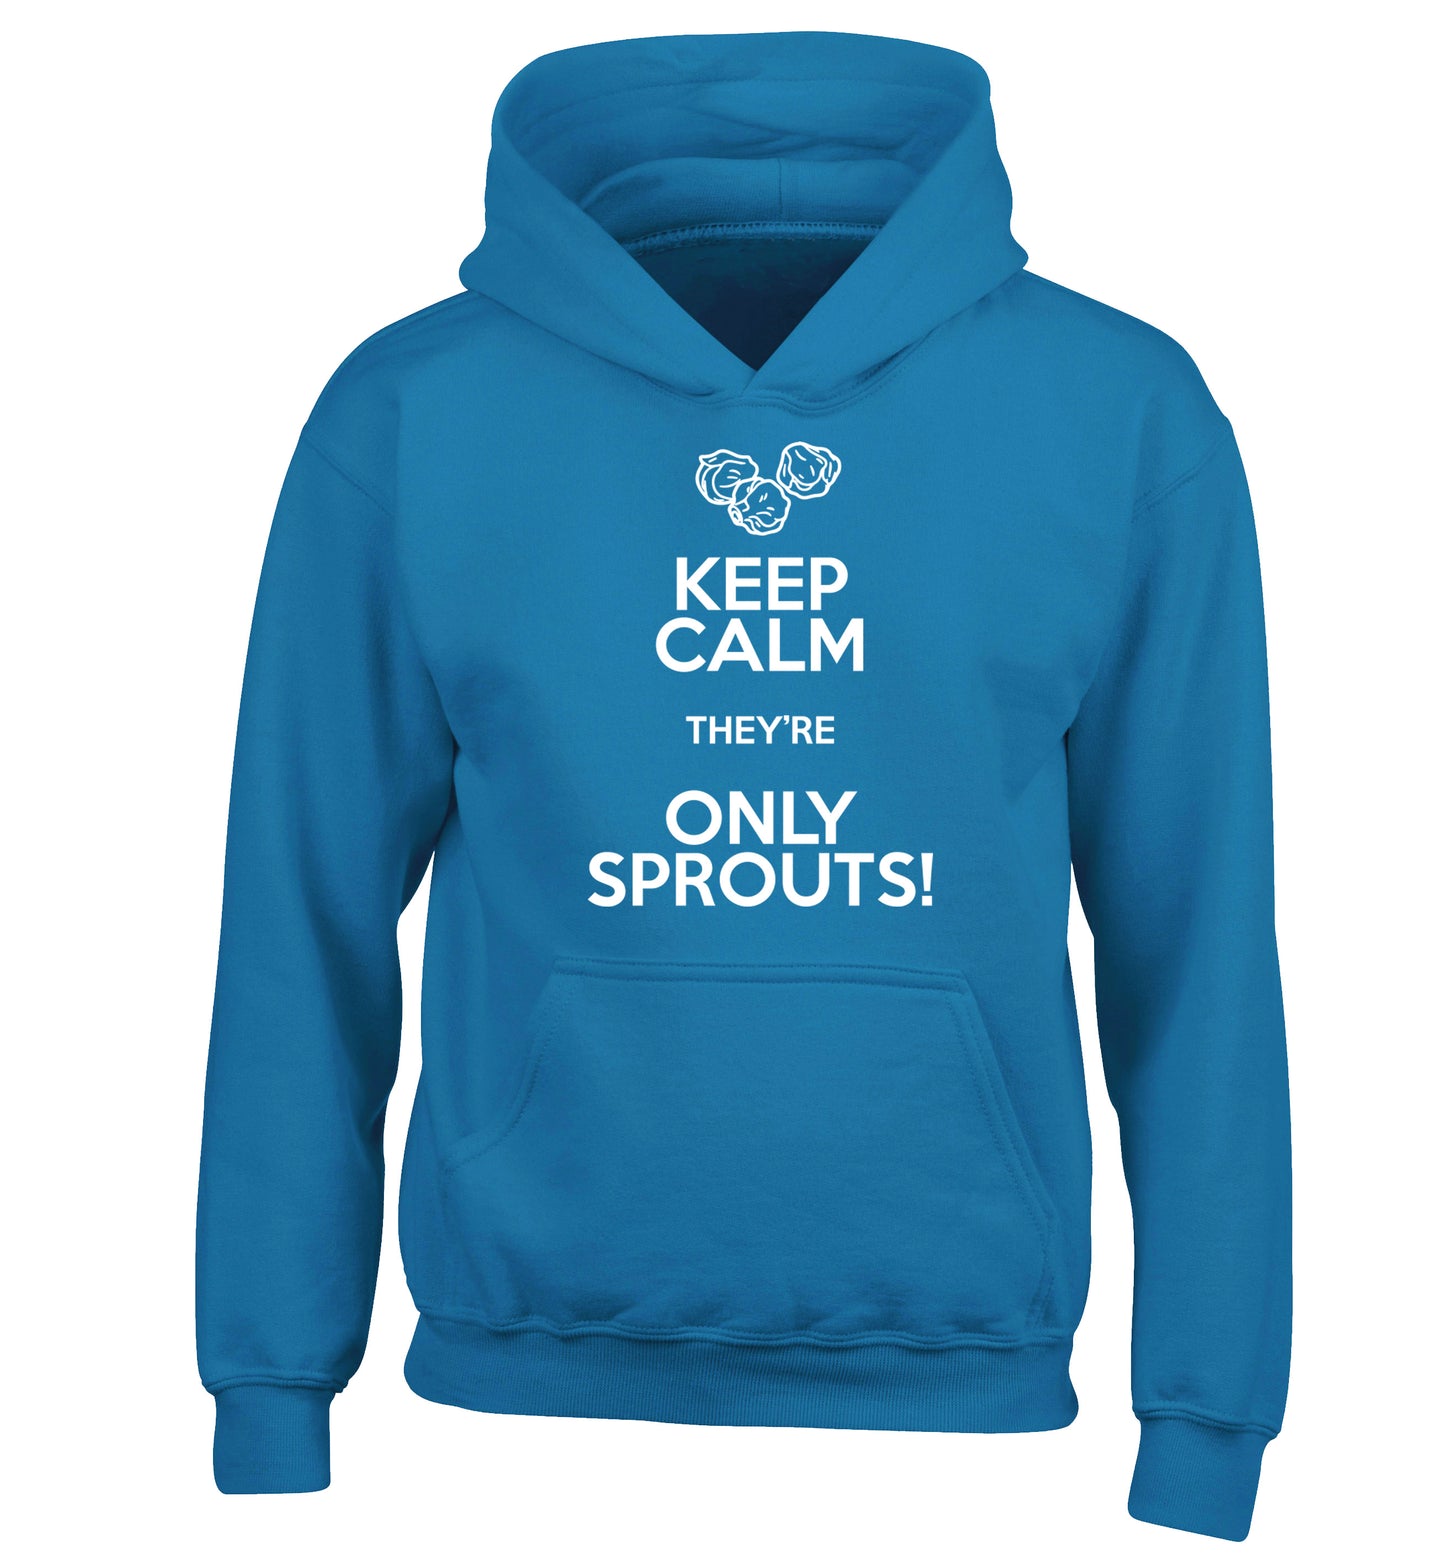 Keep calm they're only sprouts children's blue hoodie 12-13 Years